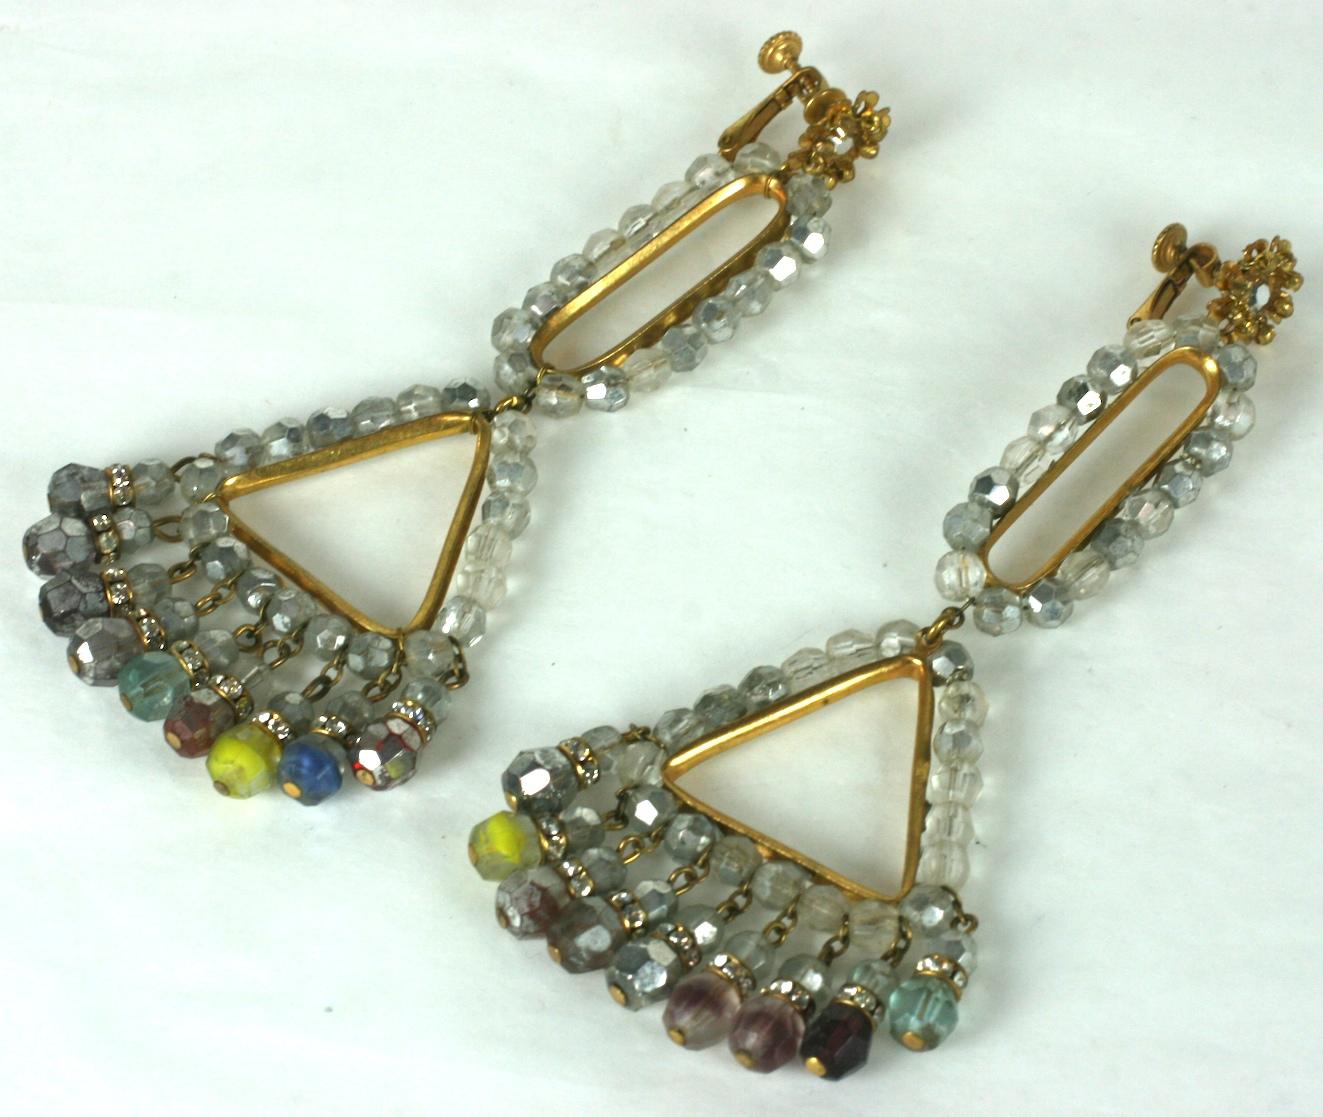 Striking, long Miriam Haskell antique faux smokey quartz long ear clips in signature Russian gilt metal with elongated oval and triangular stations which are channel set with the antiqued grey beads, ending in a fringe of grey and colored beads with